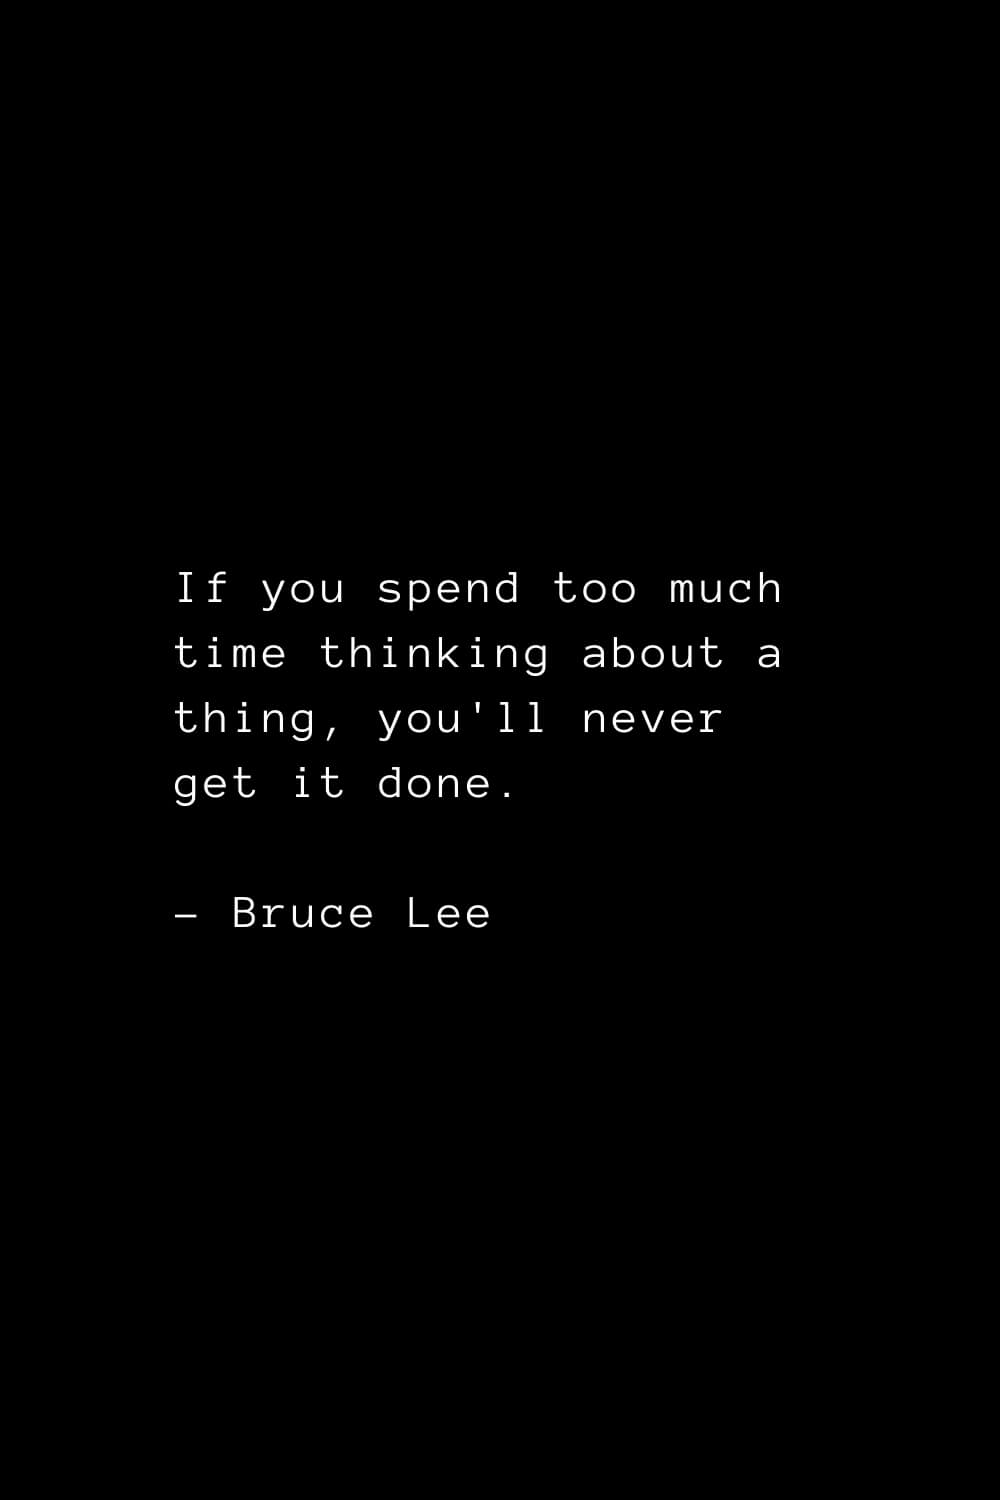 Top 28 Most Inspiring Bruce Lee Quotes to Inspire Life and Greatness